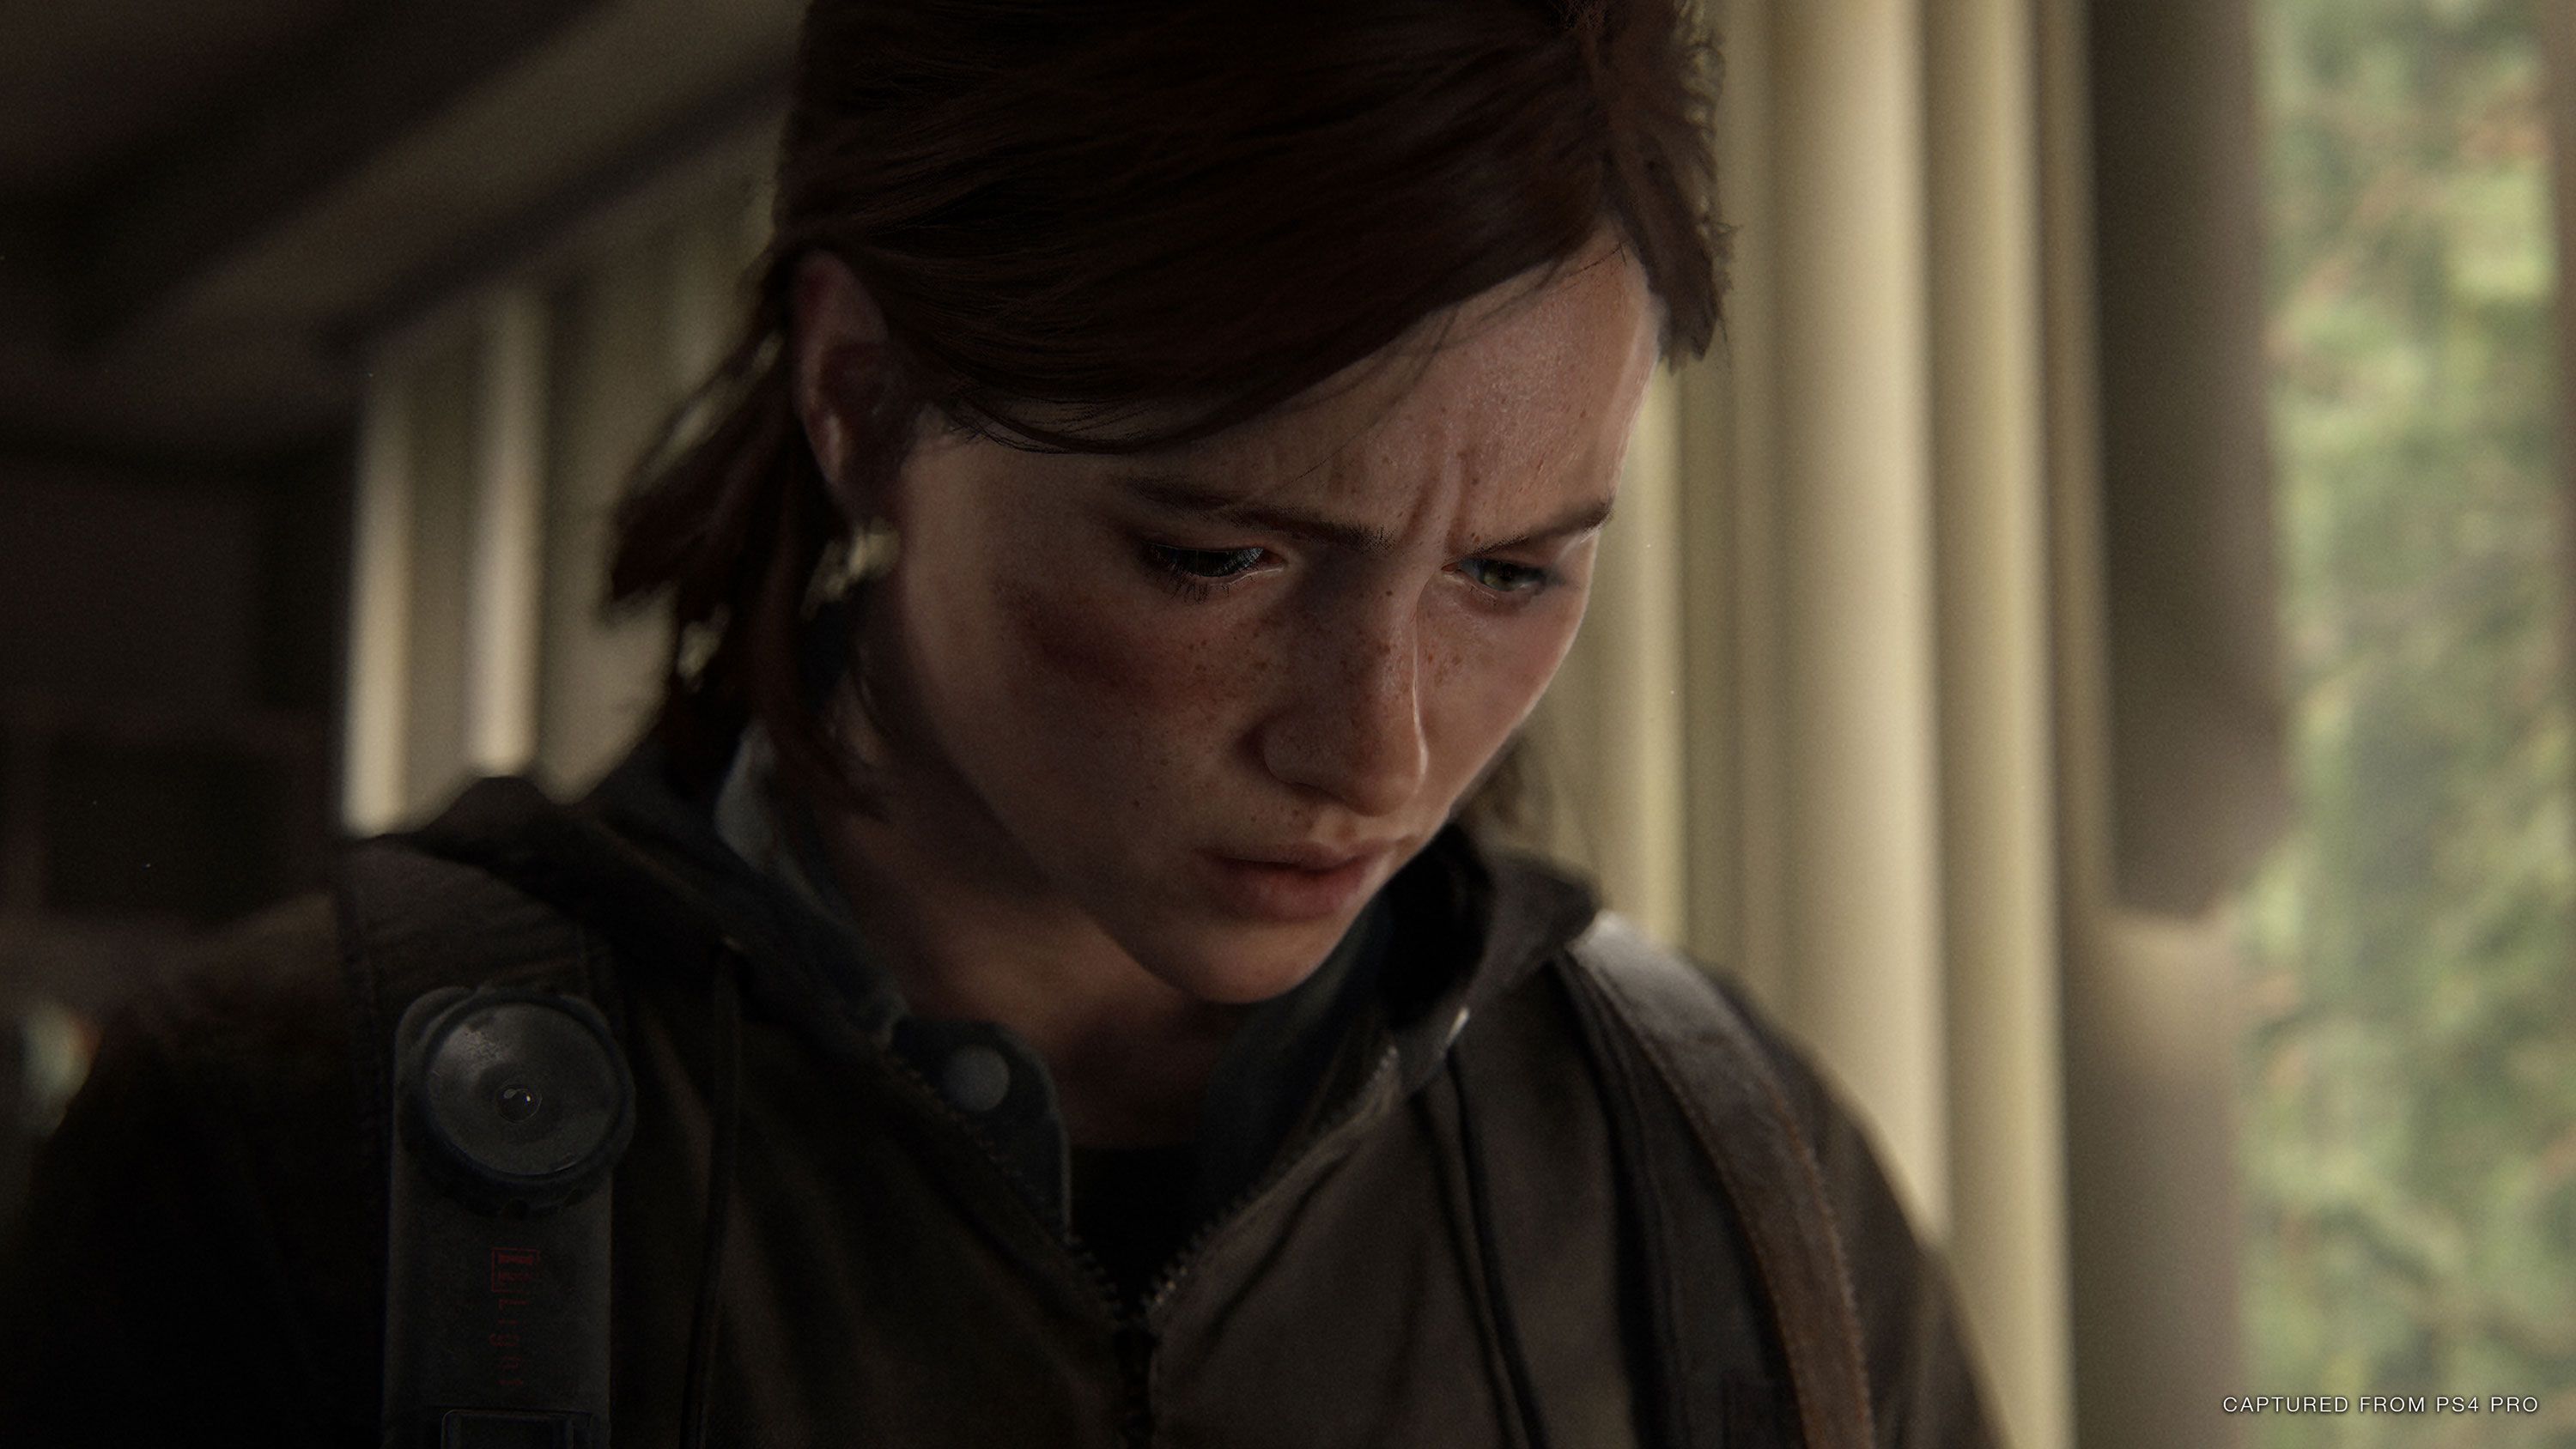 Buy The Last Of Us Part II Other